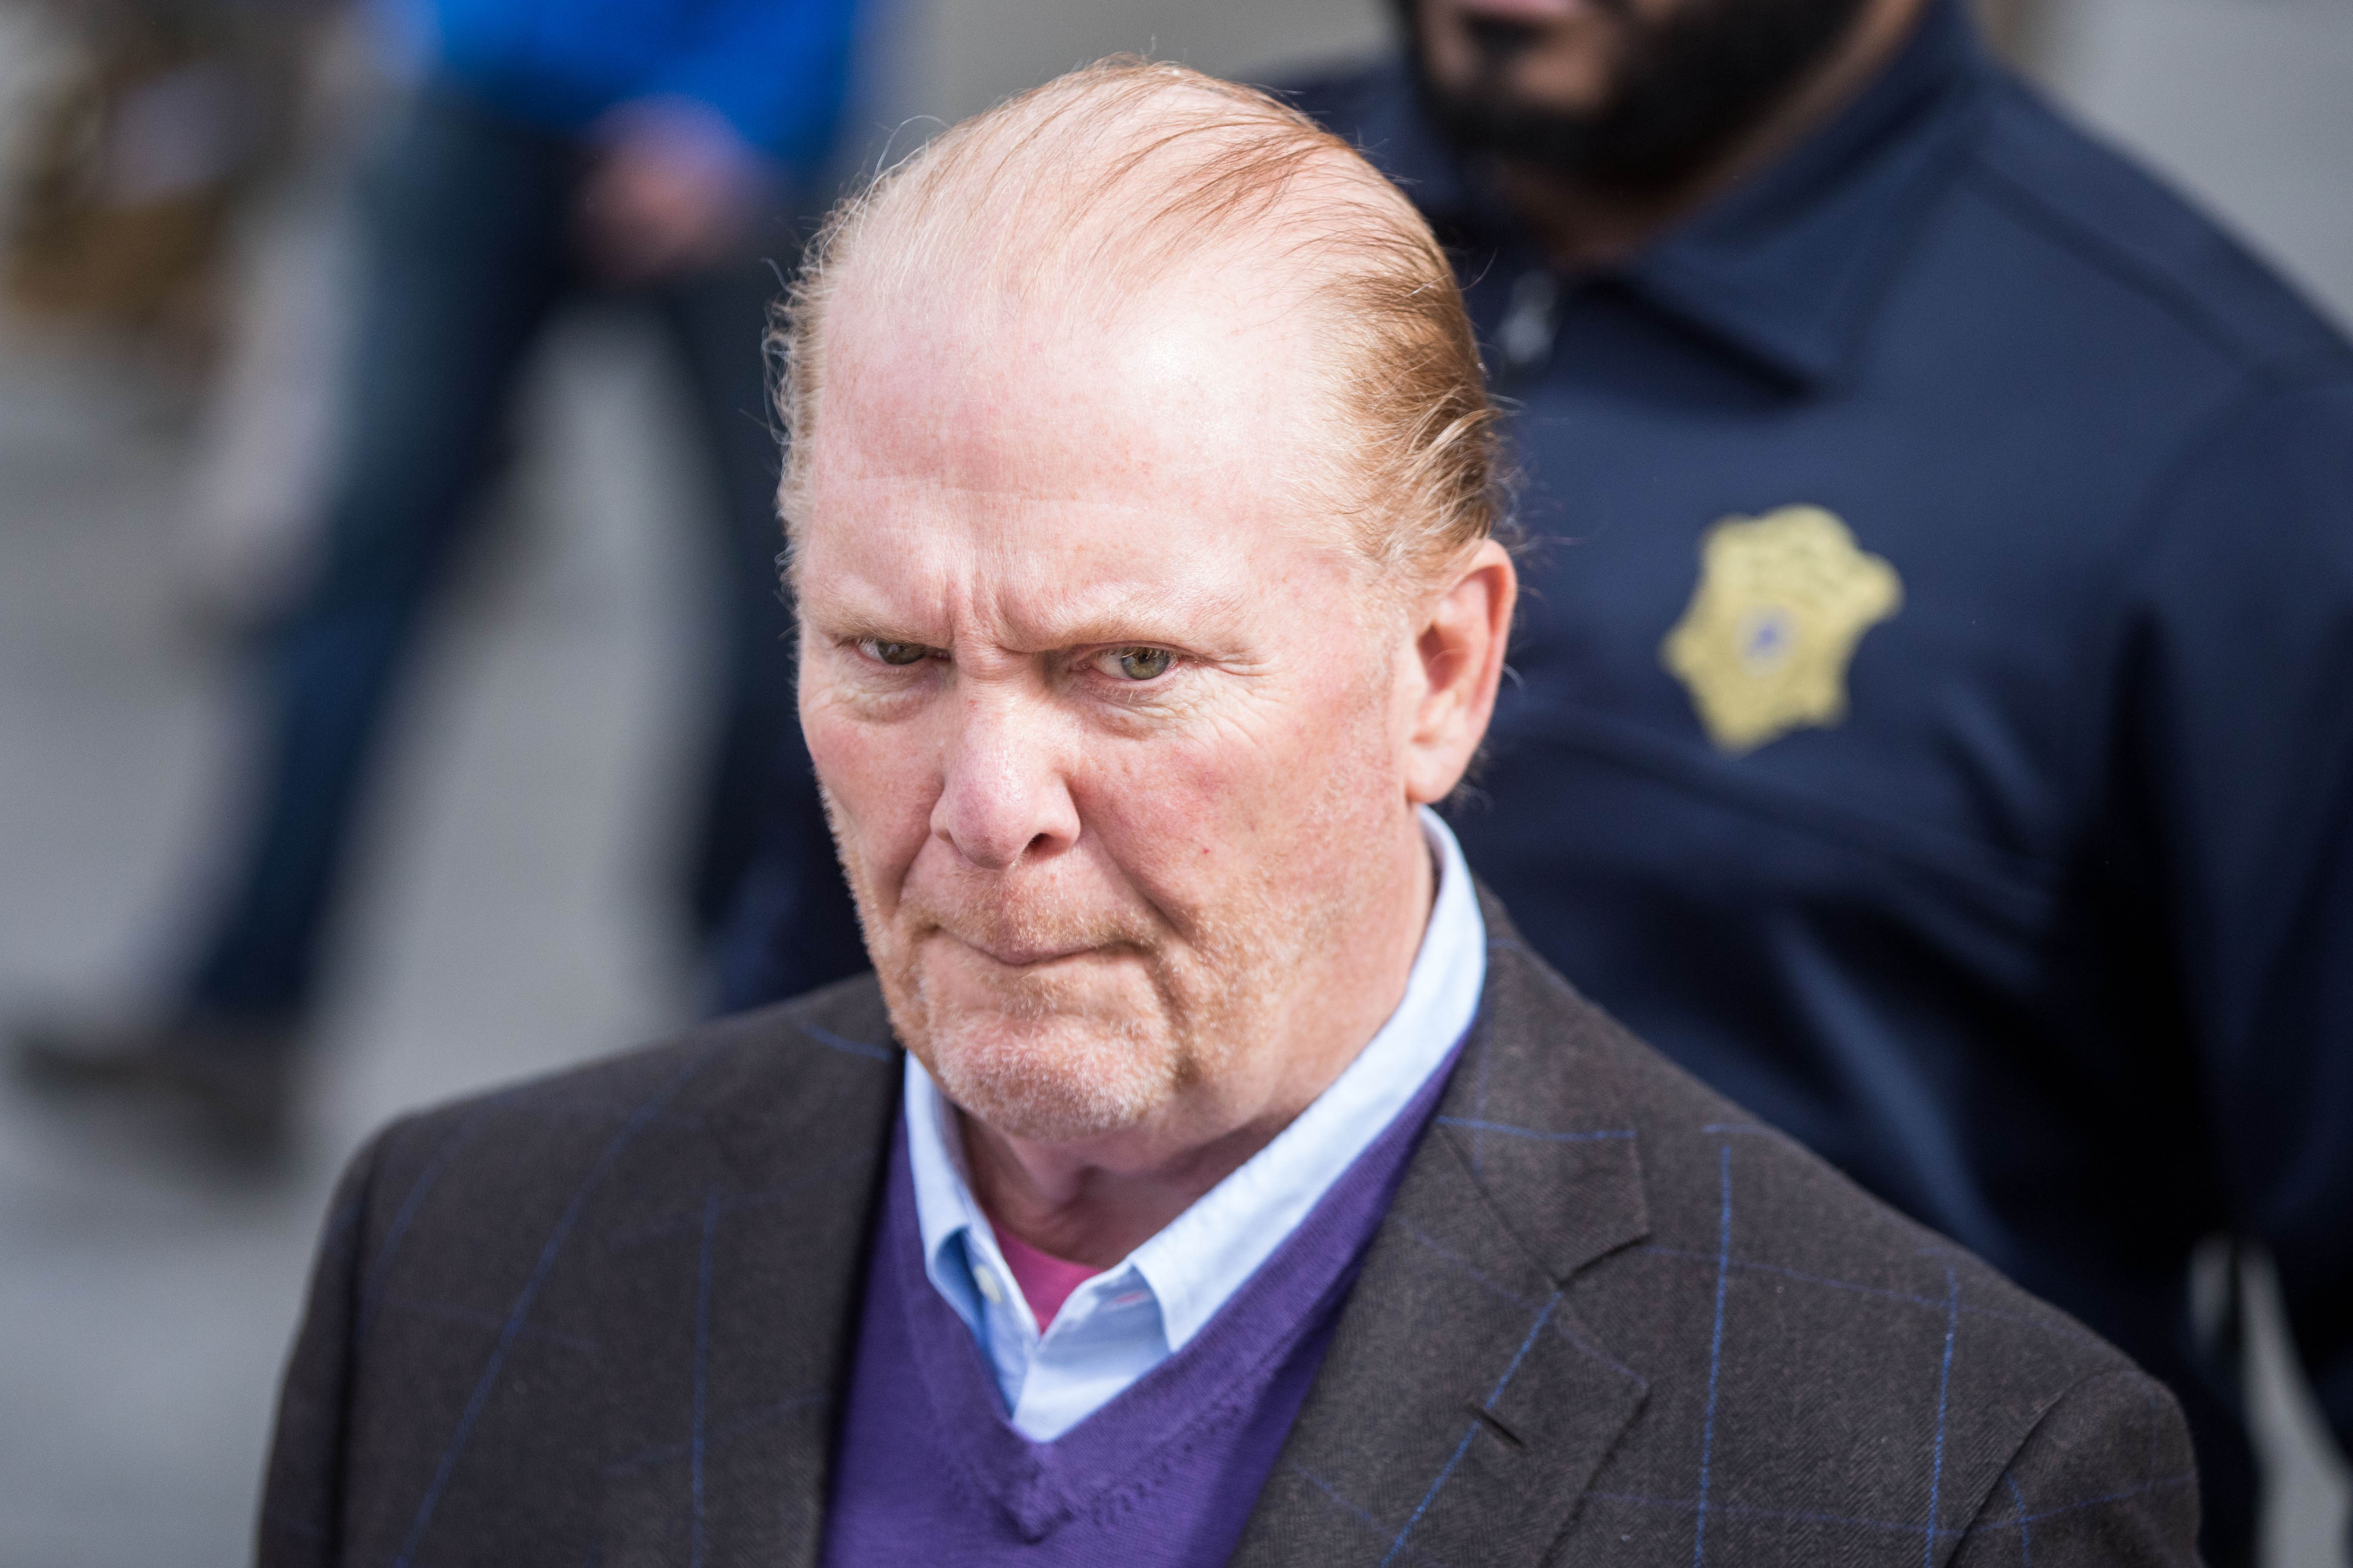 Celebrity Chef Mario Batali Arraigned On Charge Of Indecent Assault And Battery